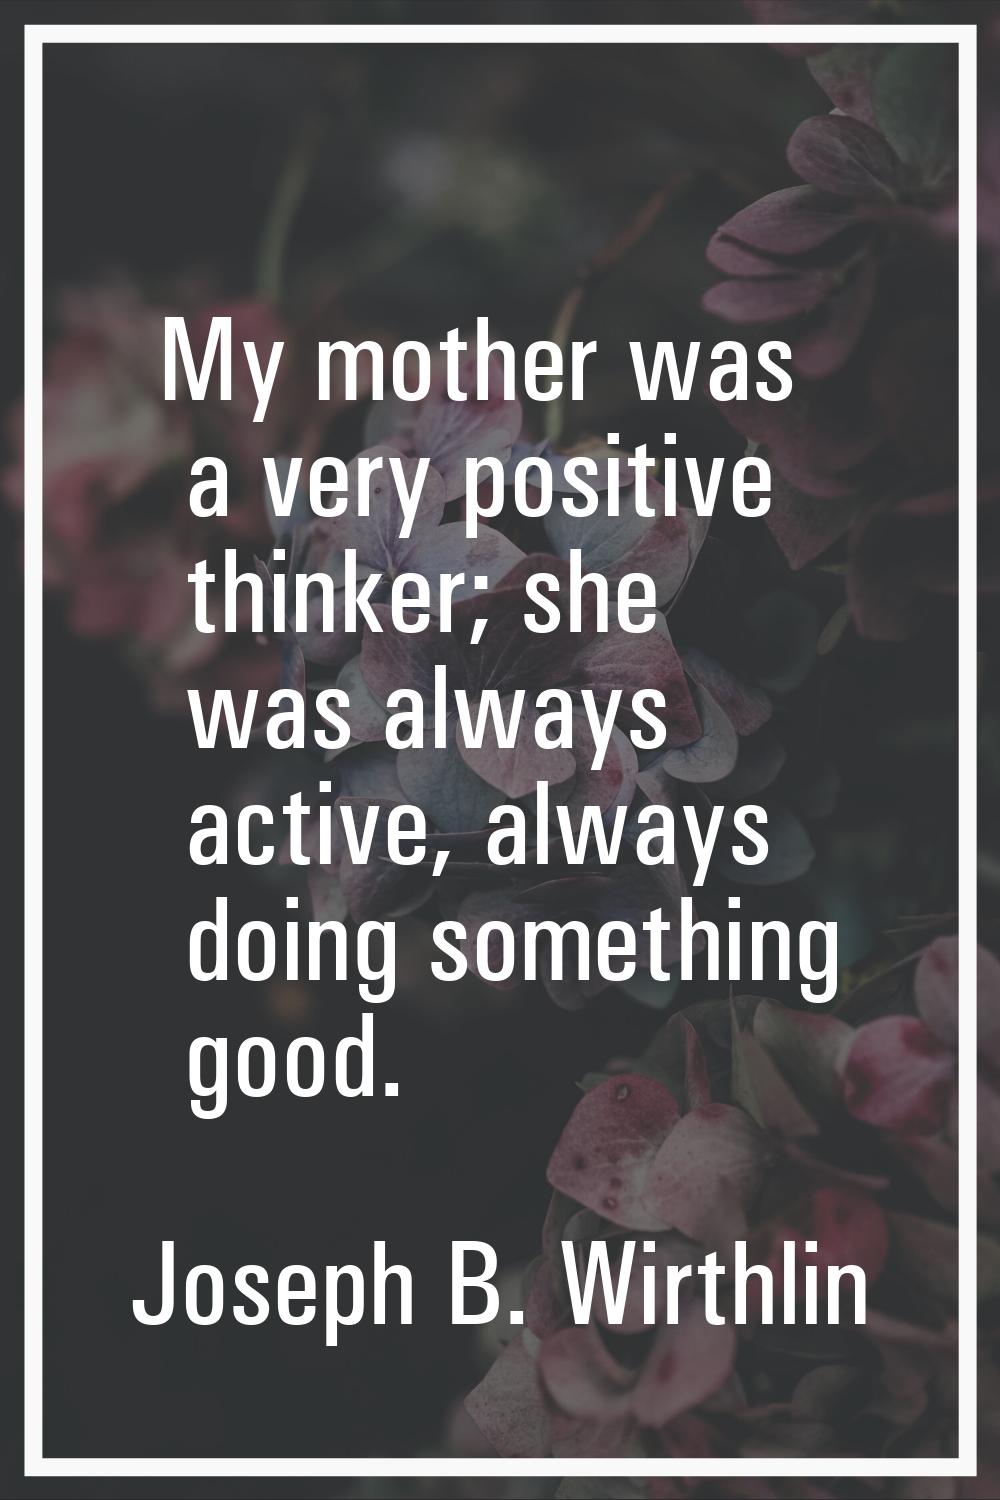 My mother was a very positive thinker; she was always active, always doing something good.